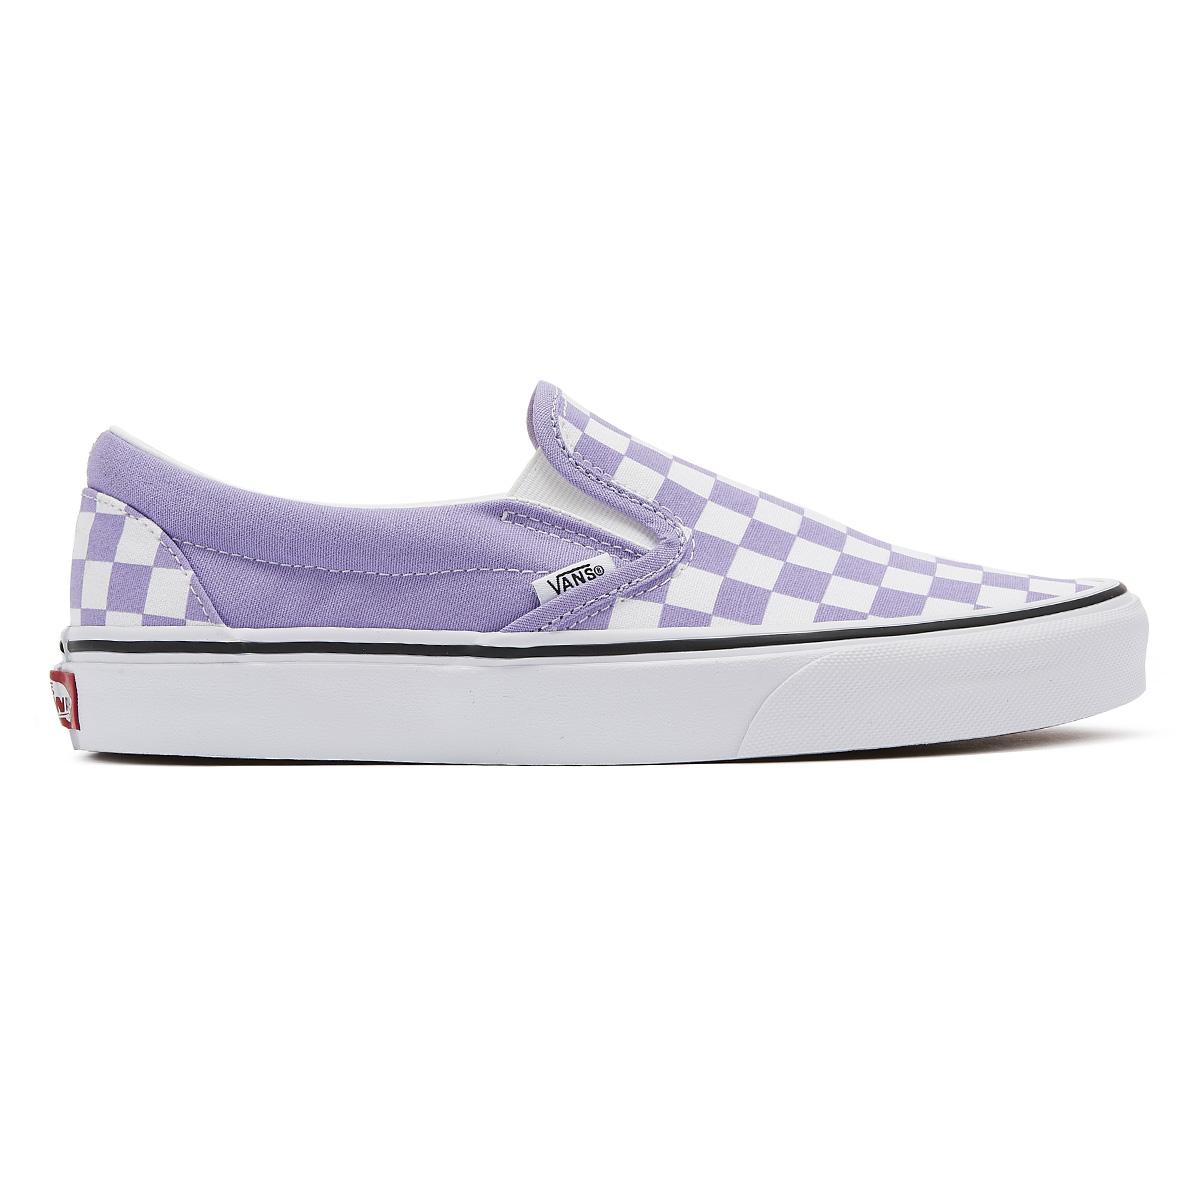 Vans Canvas Classic Tulip Checkerboard Trainers in Purple - Lyst